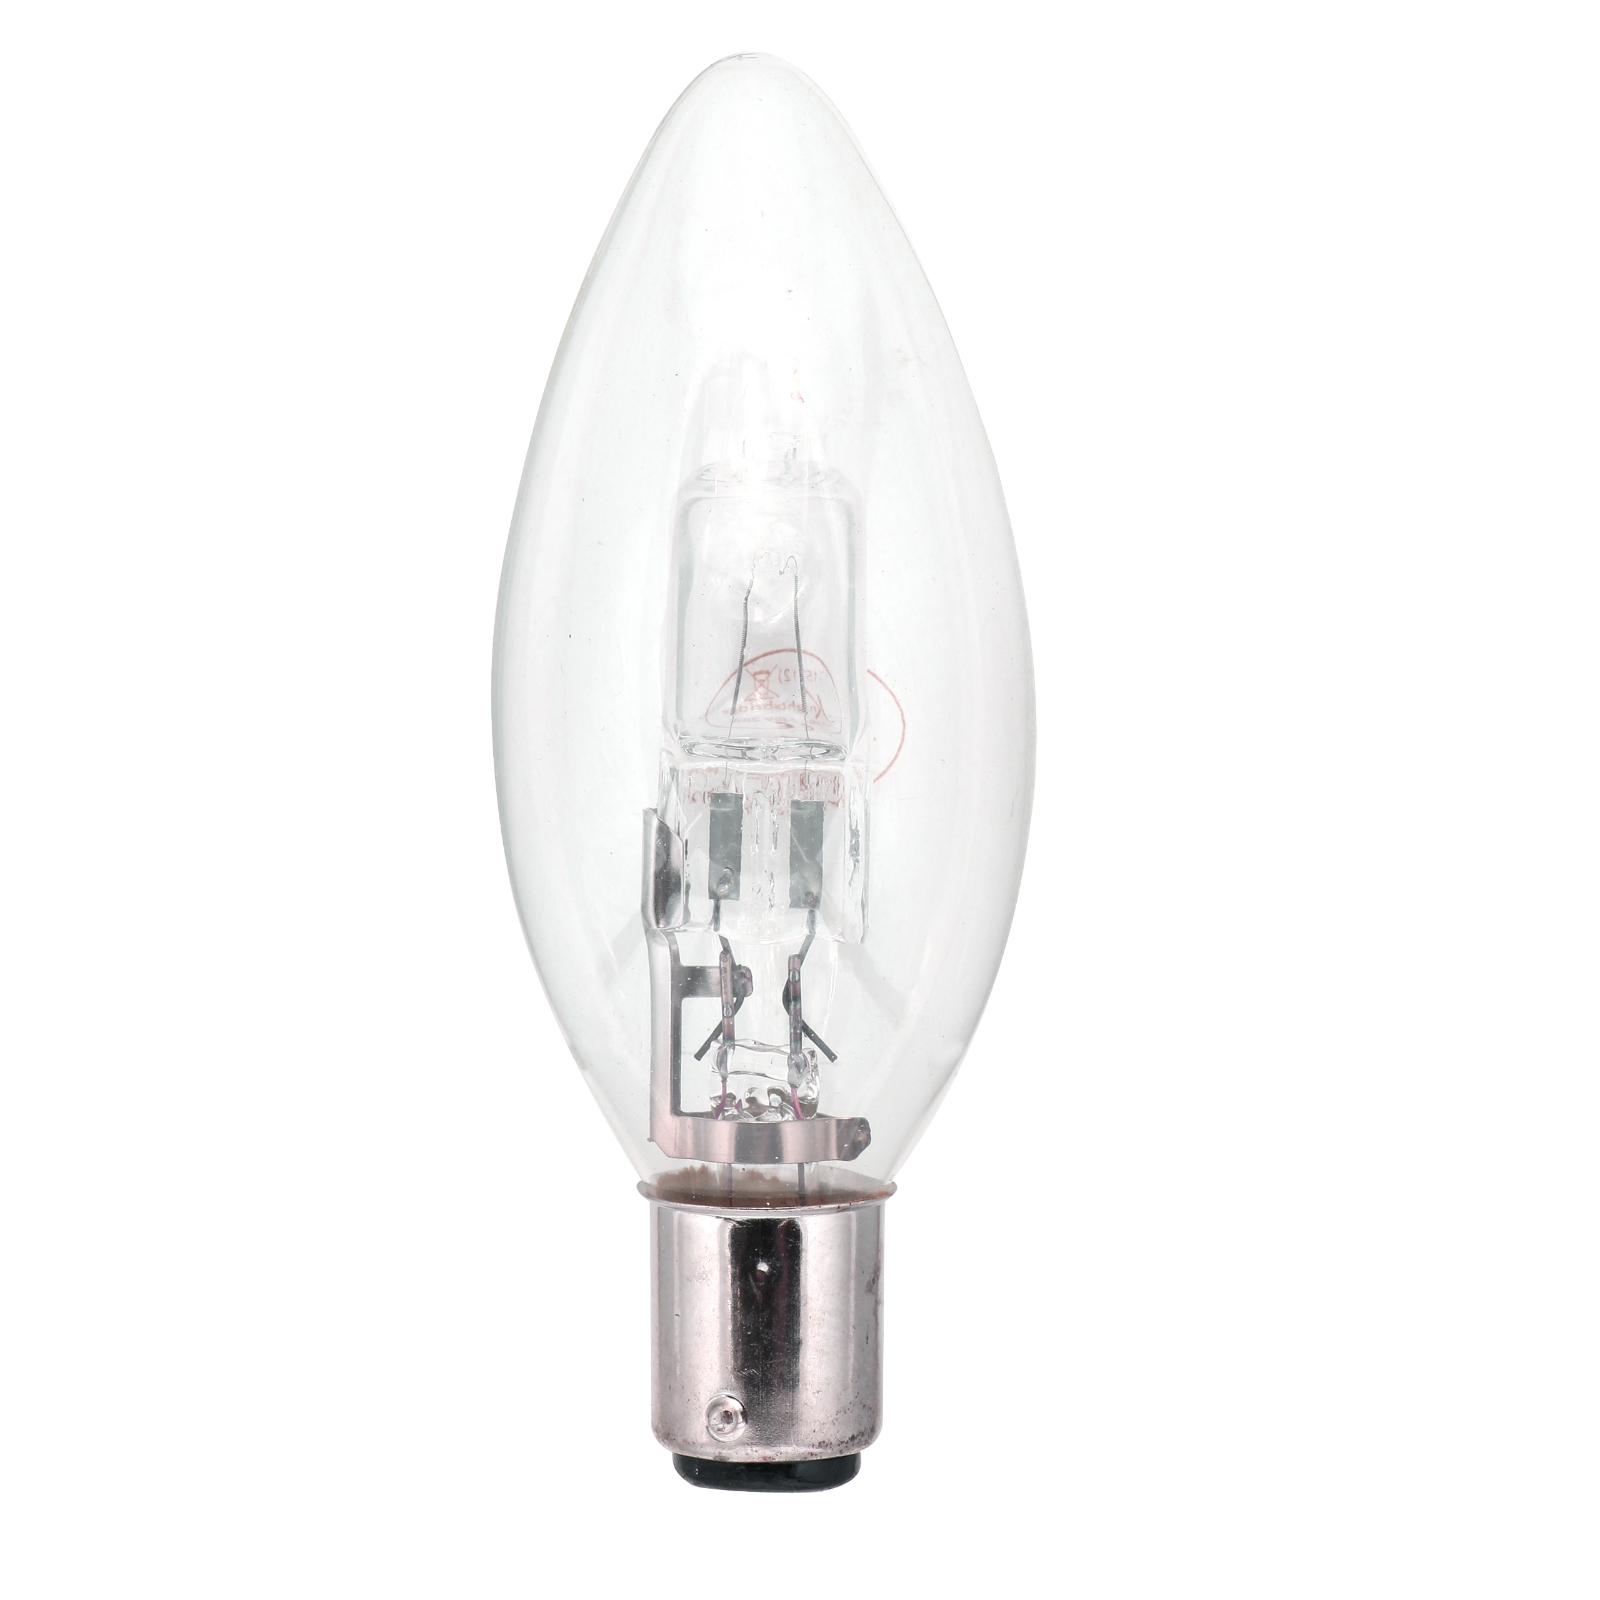 42W Halogen Energy Saving Clear Candle Lamp SBC (equivalent To 60W) - HALO-C42SBC 